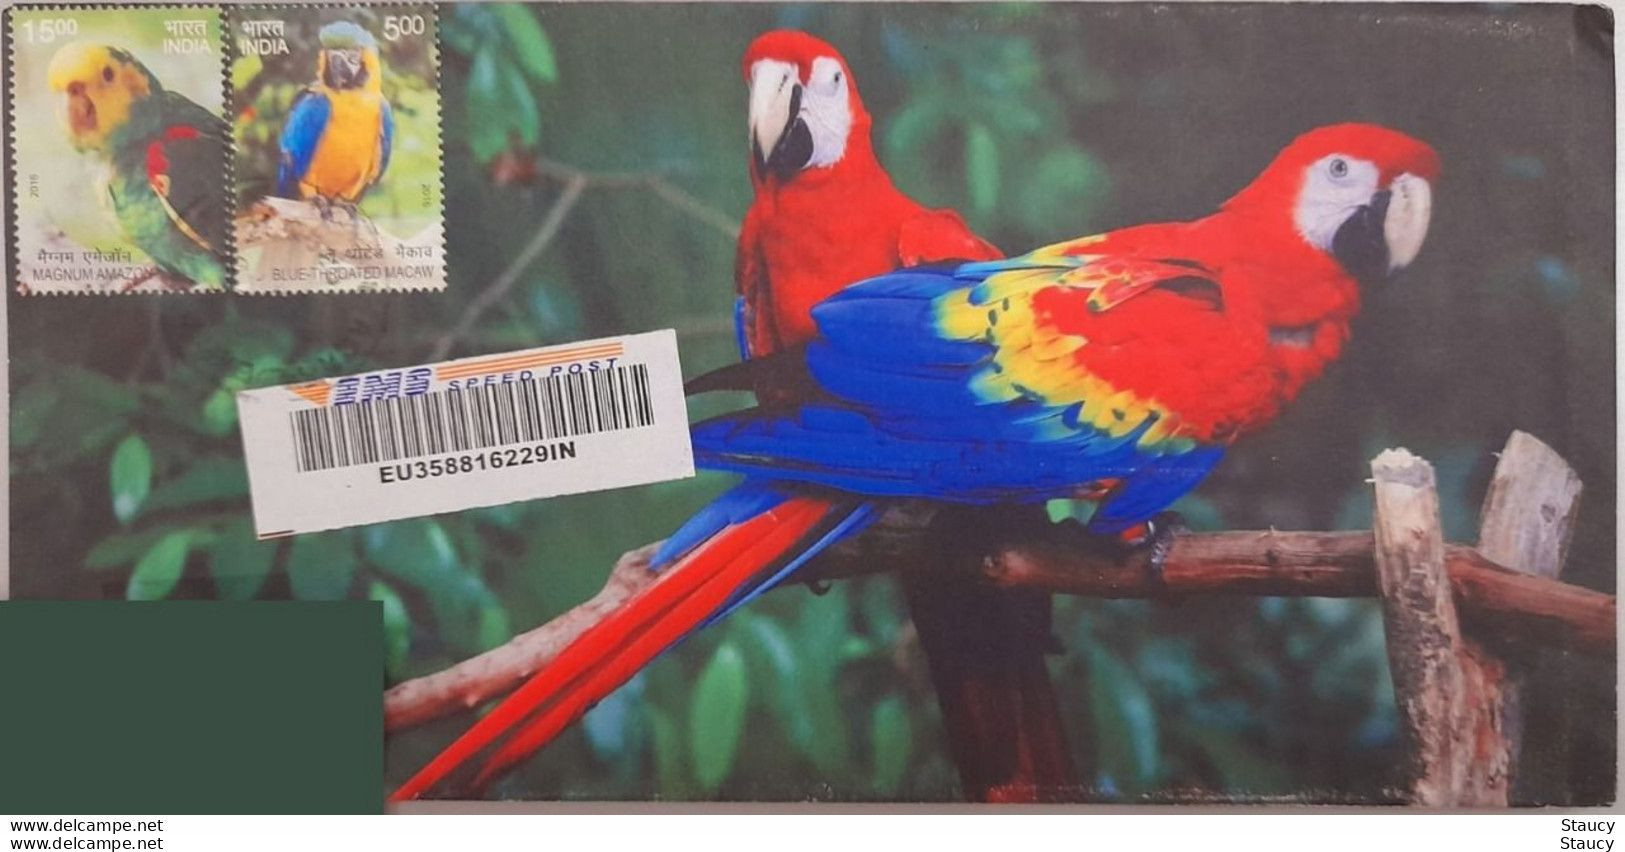 India 2018 Registered Speed Post Cover On Exotic Birds Issue Stamps / Parrots On Stamp Postally / Commercially Used - Cuculi, Turaco